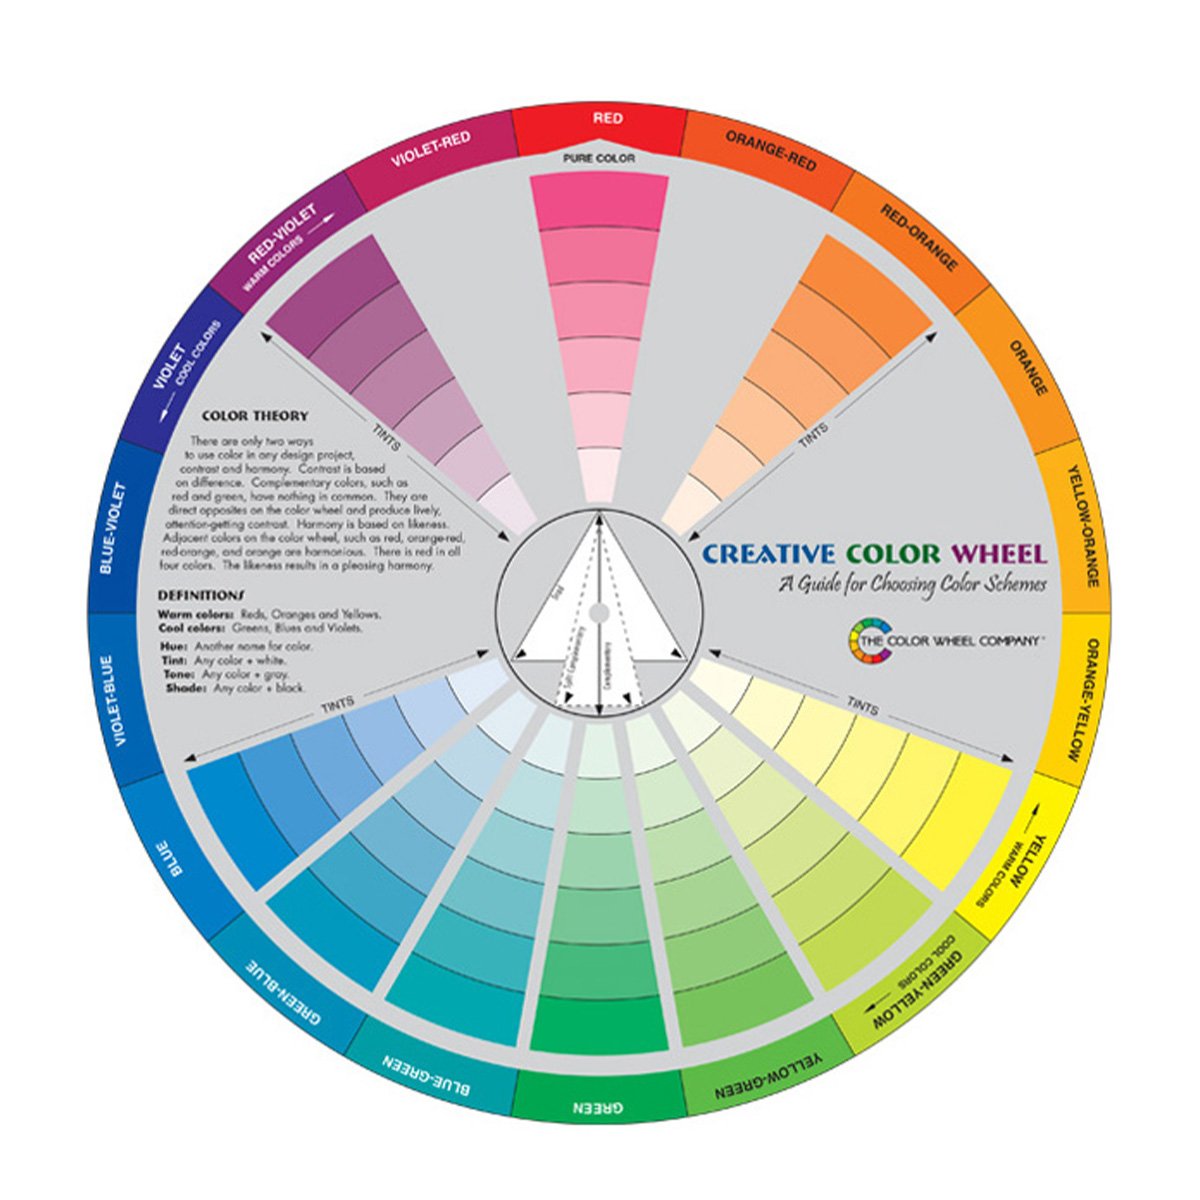 Creative Color Wheel Large 9 1/4 inch Diameter 3389 • Canada's largest ...